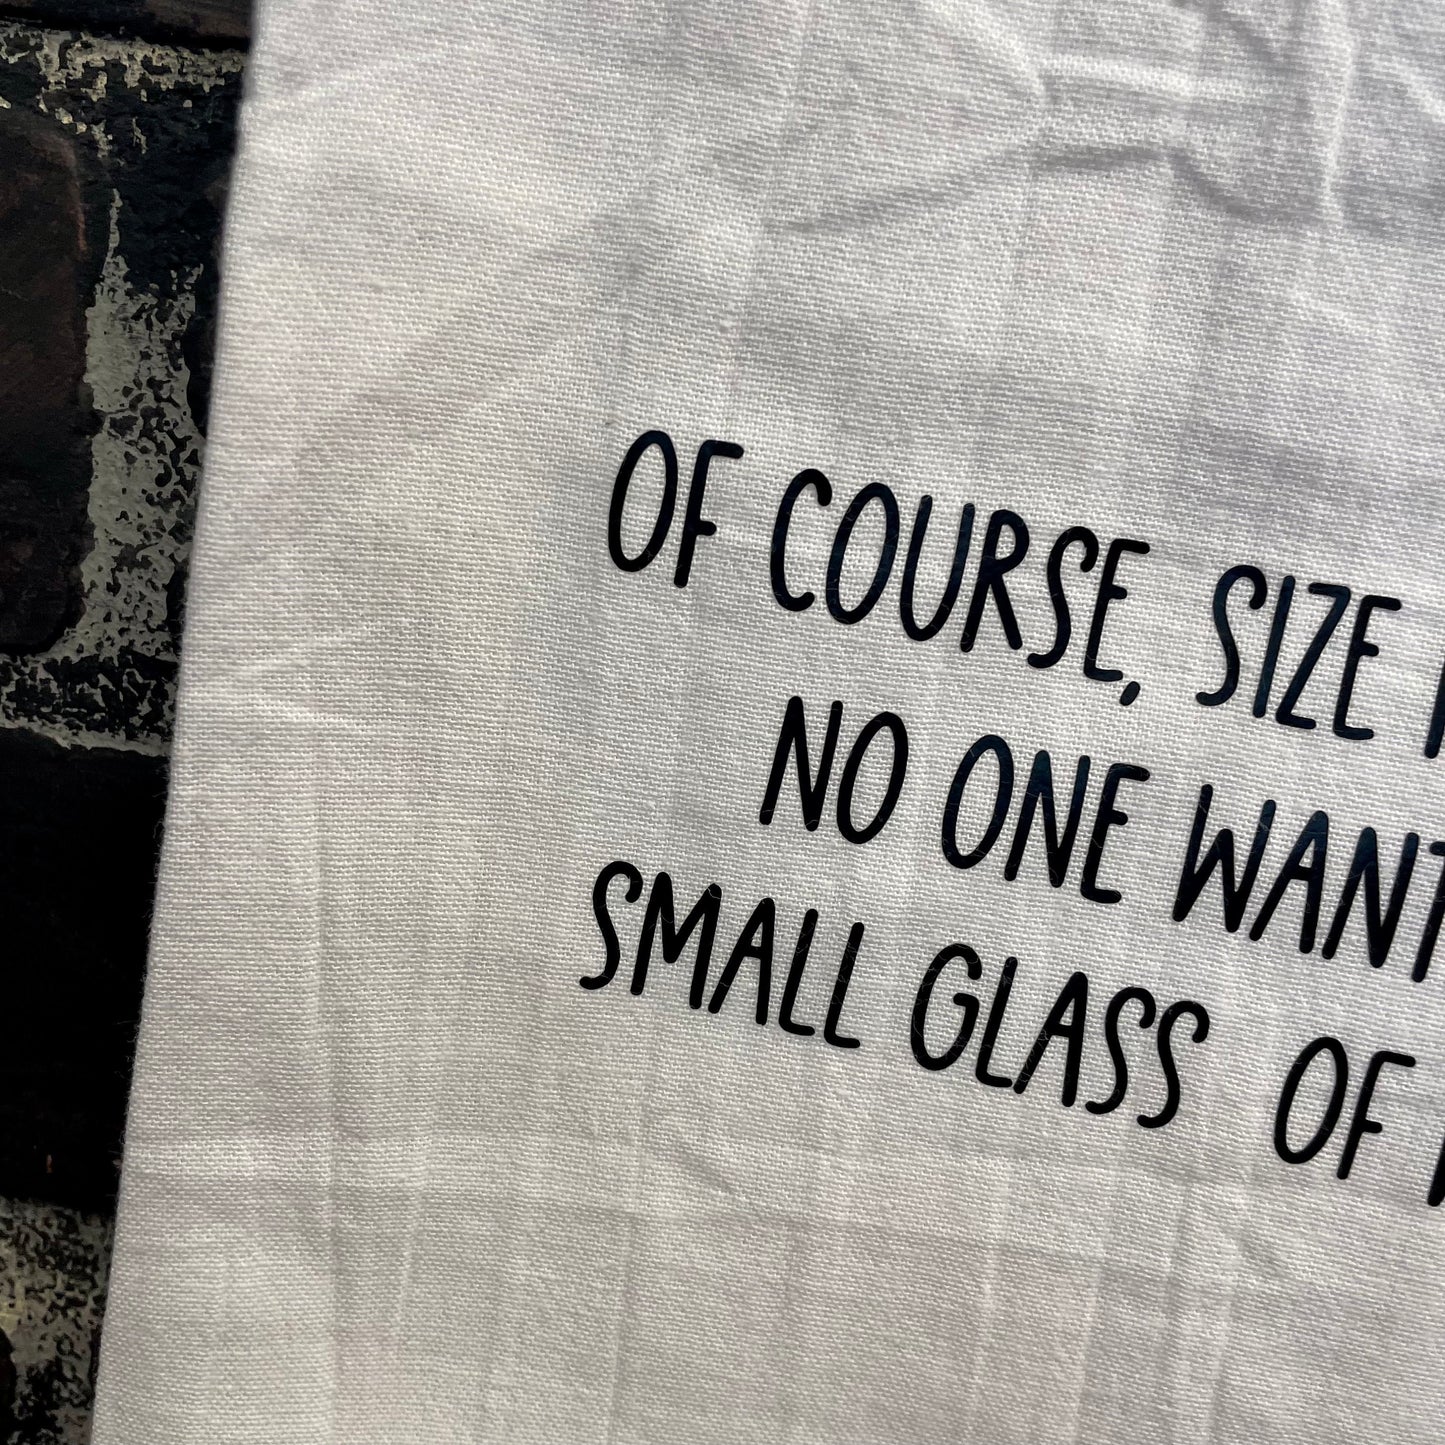 Of Course size matters no one wants a small glass of wine, Kitchen Tea Towel